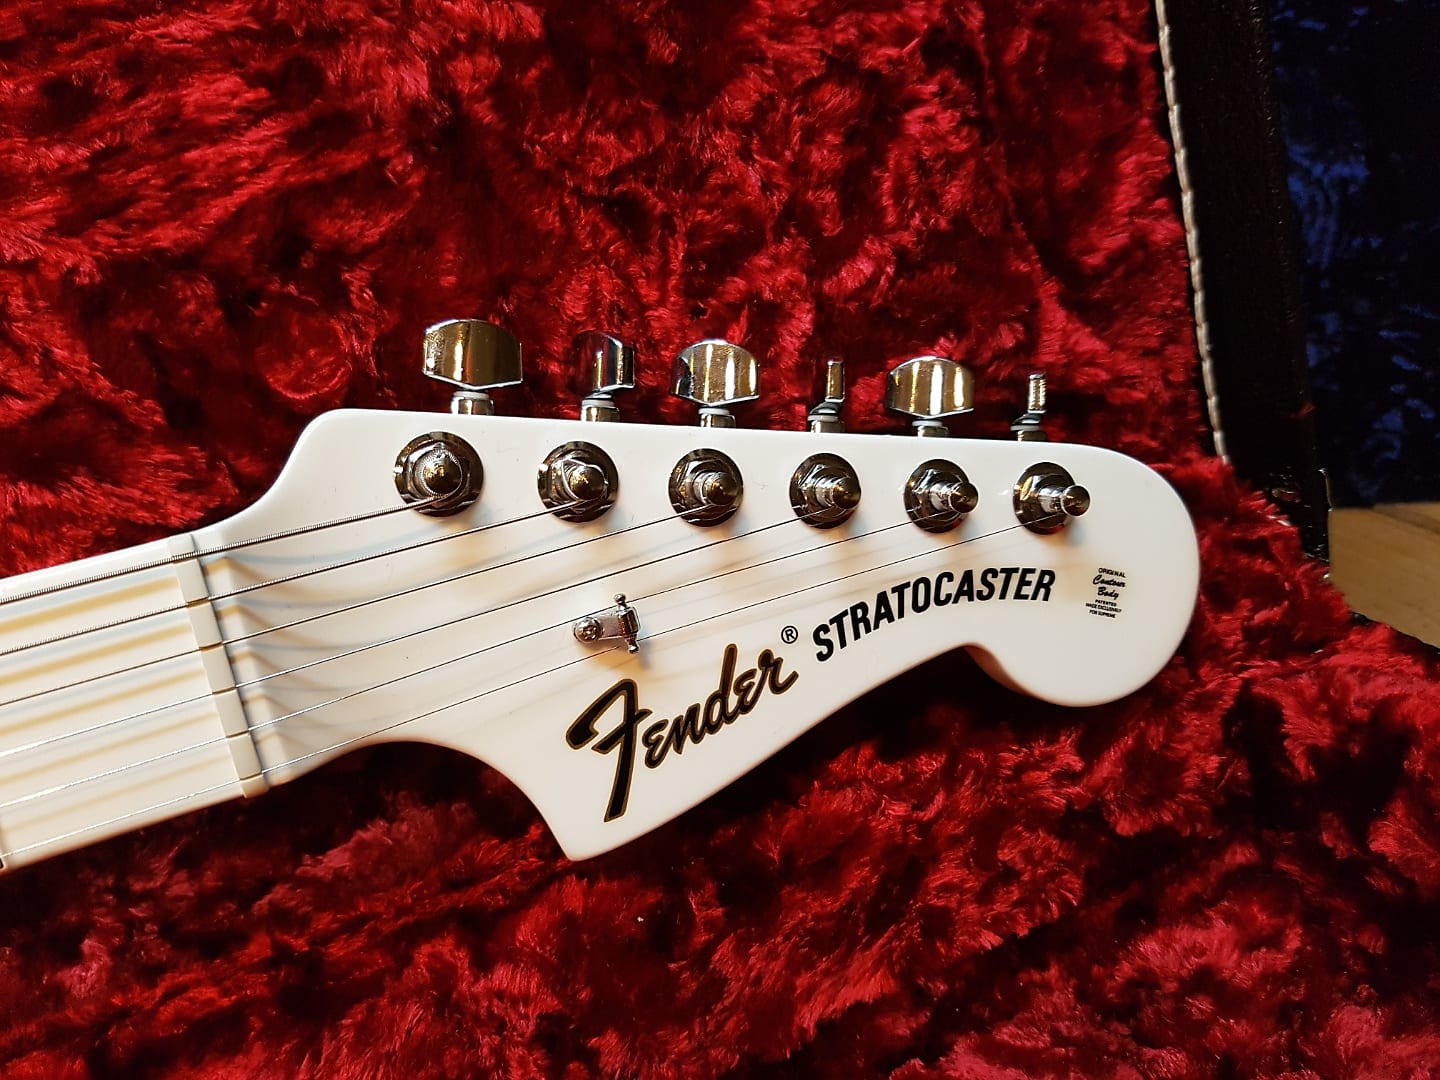 The headstock of the all-white Stratocaster. If only the guitar didn't have the darn red "Supreme" logo between the picks, which diminishes the guitar's beauty